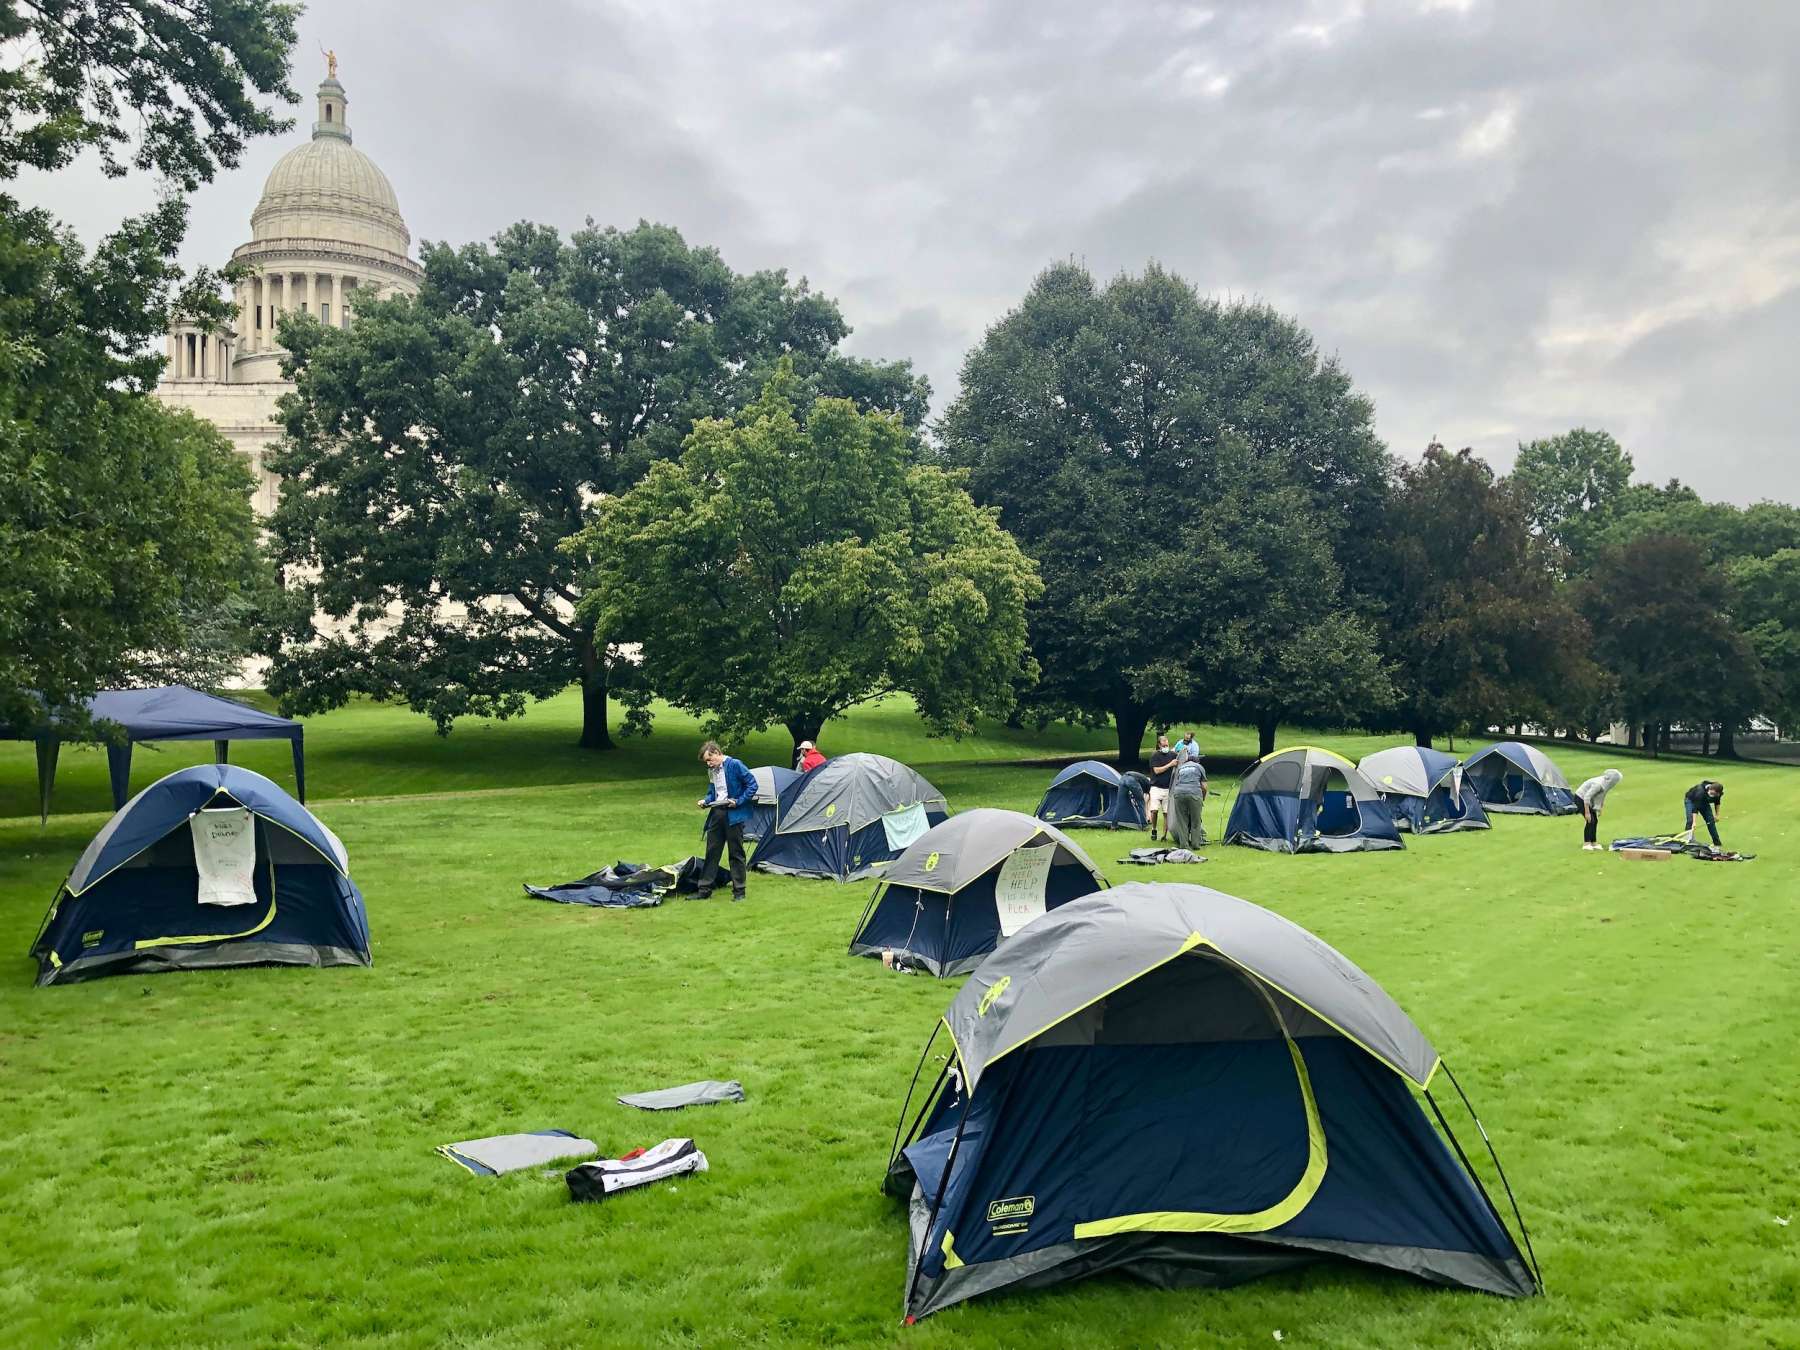 Rhode Island News: Homelessness advocates erect tents on the State House lawn to be noticed